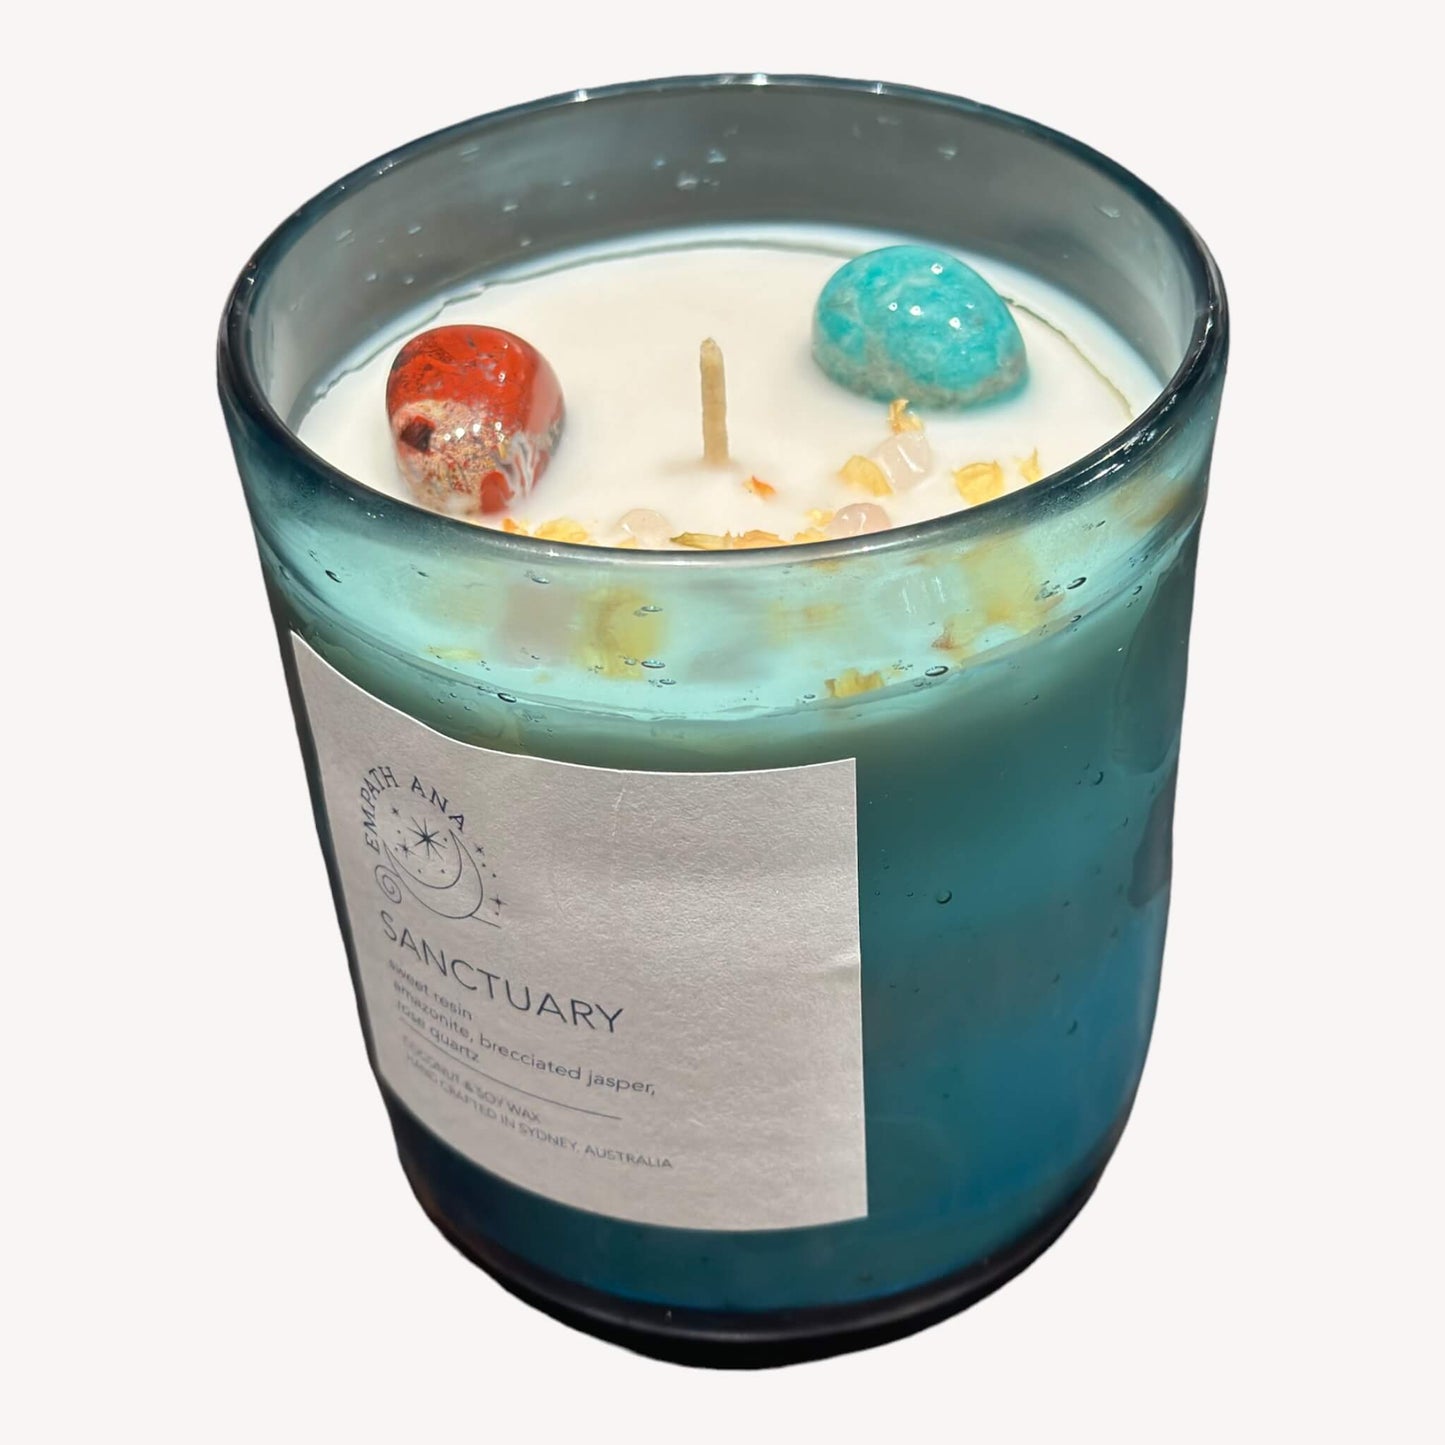 Top of Large Sanctuary Crystal Candle: Overhead view, highlighting the trio of Amazonite, Brecciated-Jasper, and Rose Quartz crystals within the coconut/soy wax. Large size (400mls).